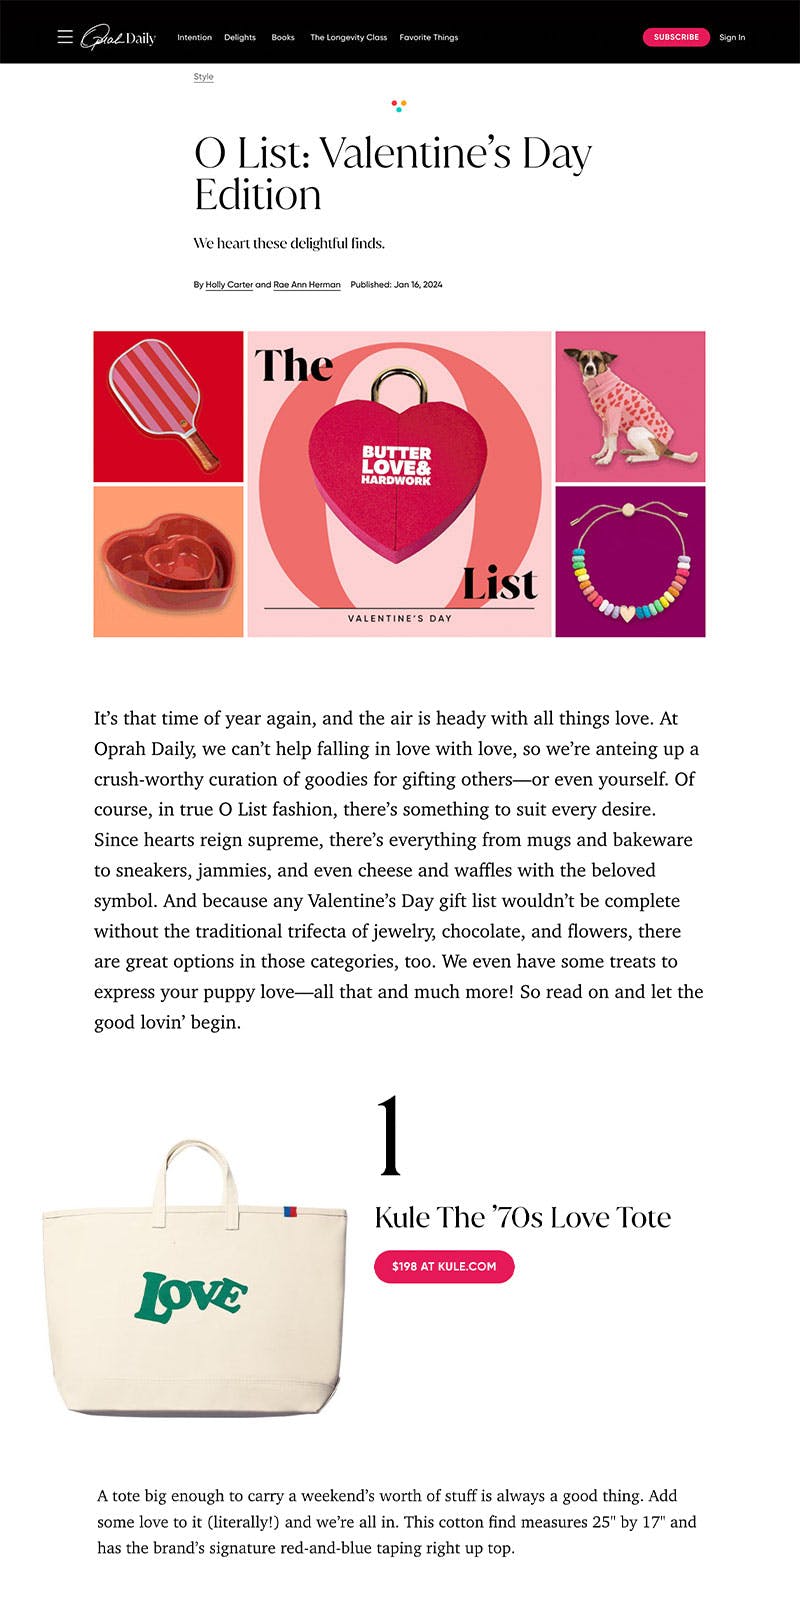 Oprah Daily featuring KULE tote as best Valentine's Day gift